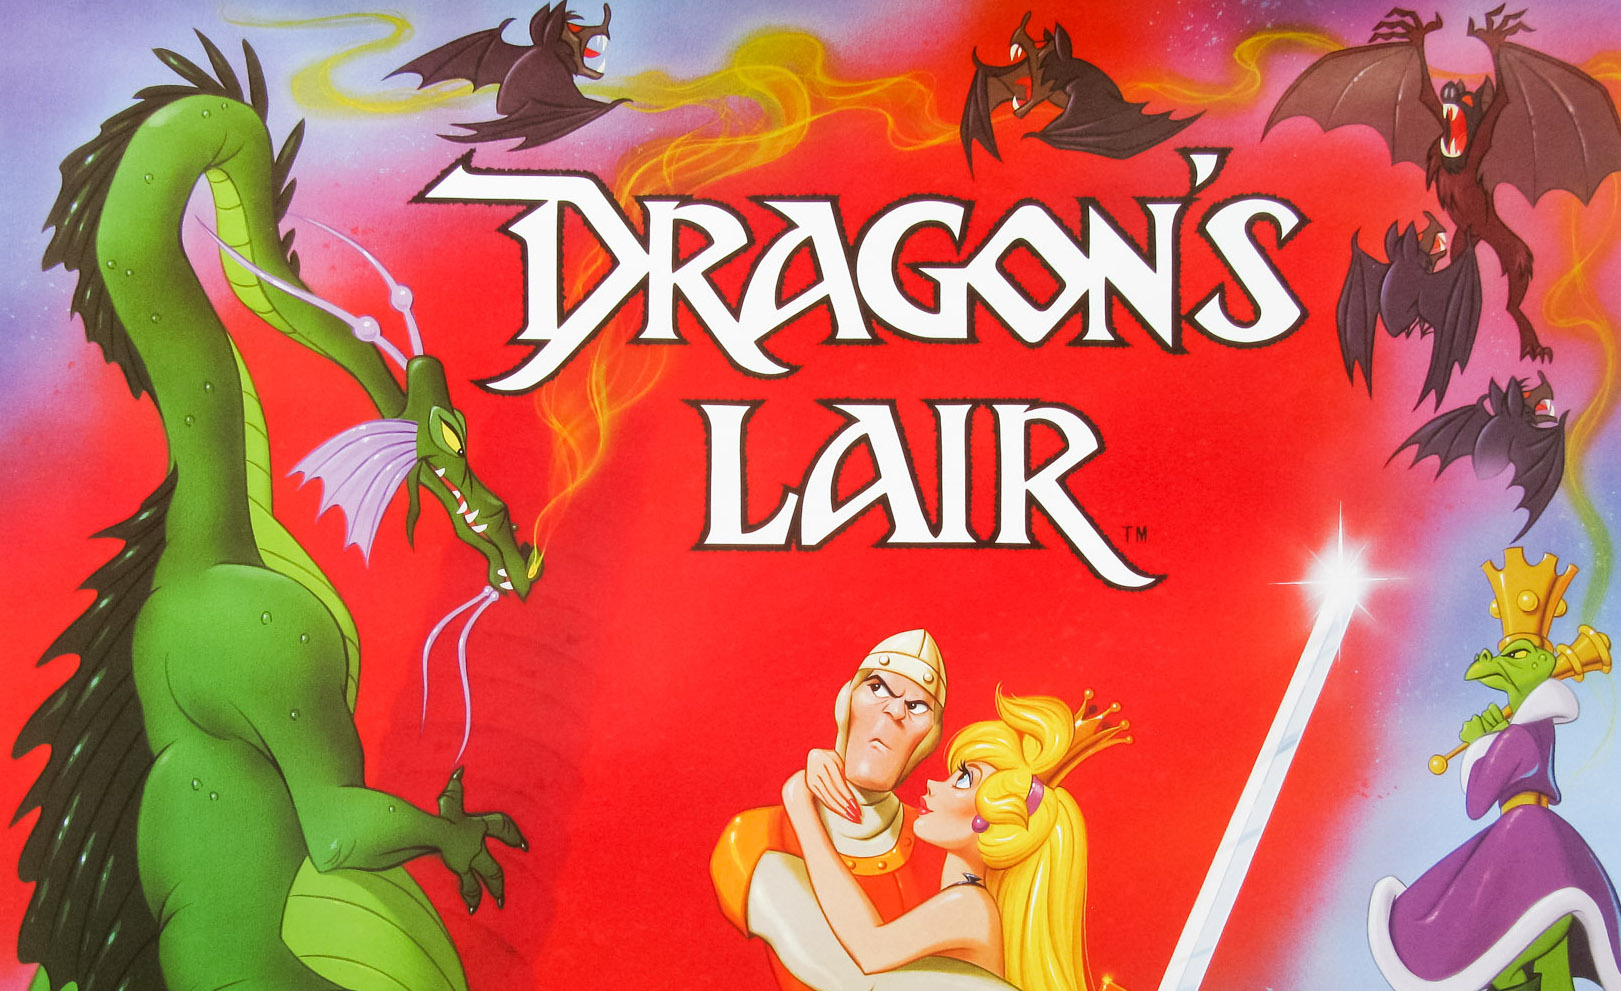 Lasers, Discs and Dragons: Remembering Don Bluth's Dragon's Lair -  Paleotronic Magazine